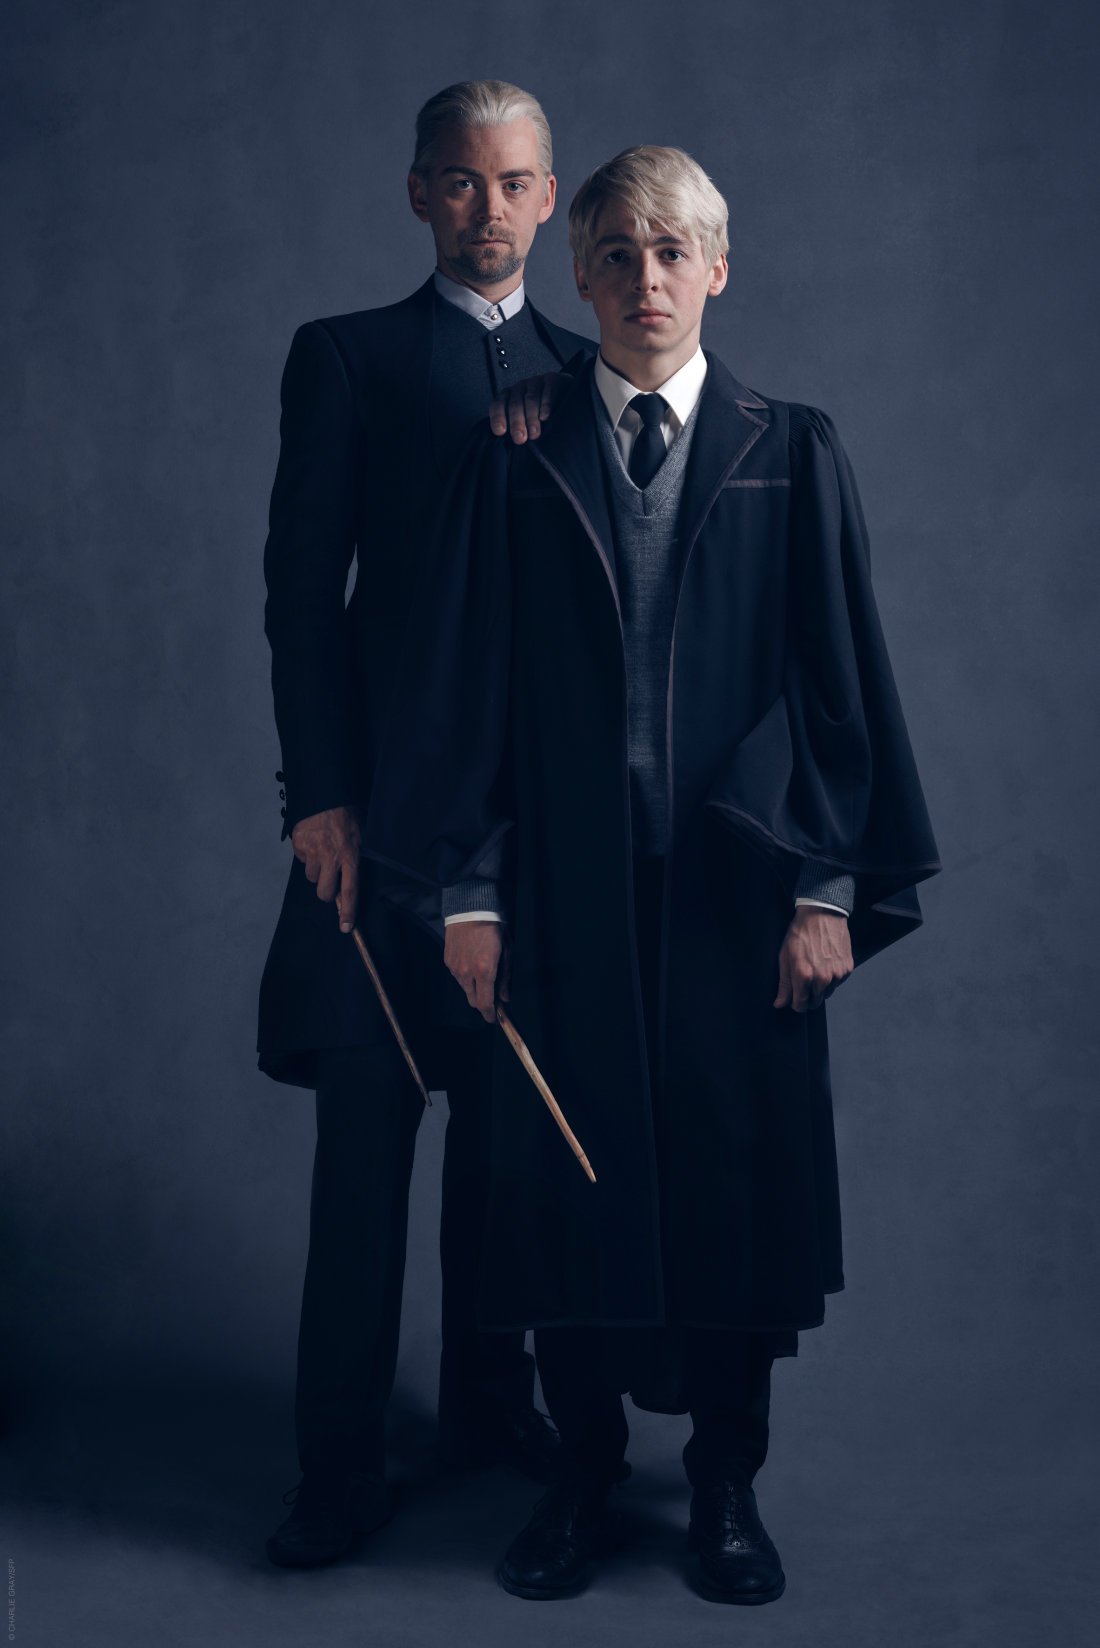 Harry Potter and the Cursed Child: ecco Draco e Scorpius Malfoy!